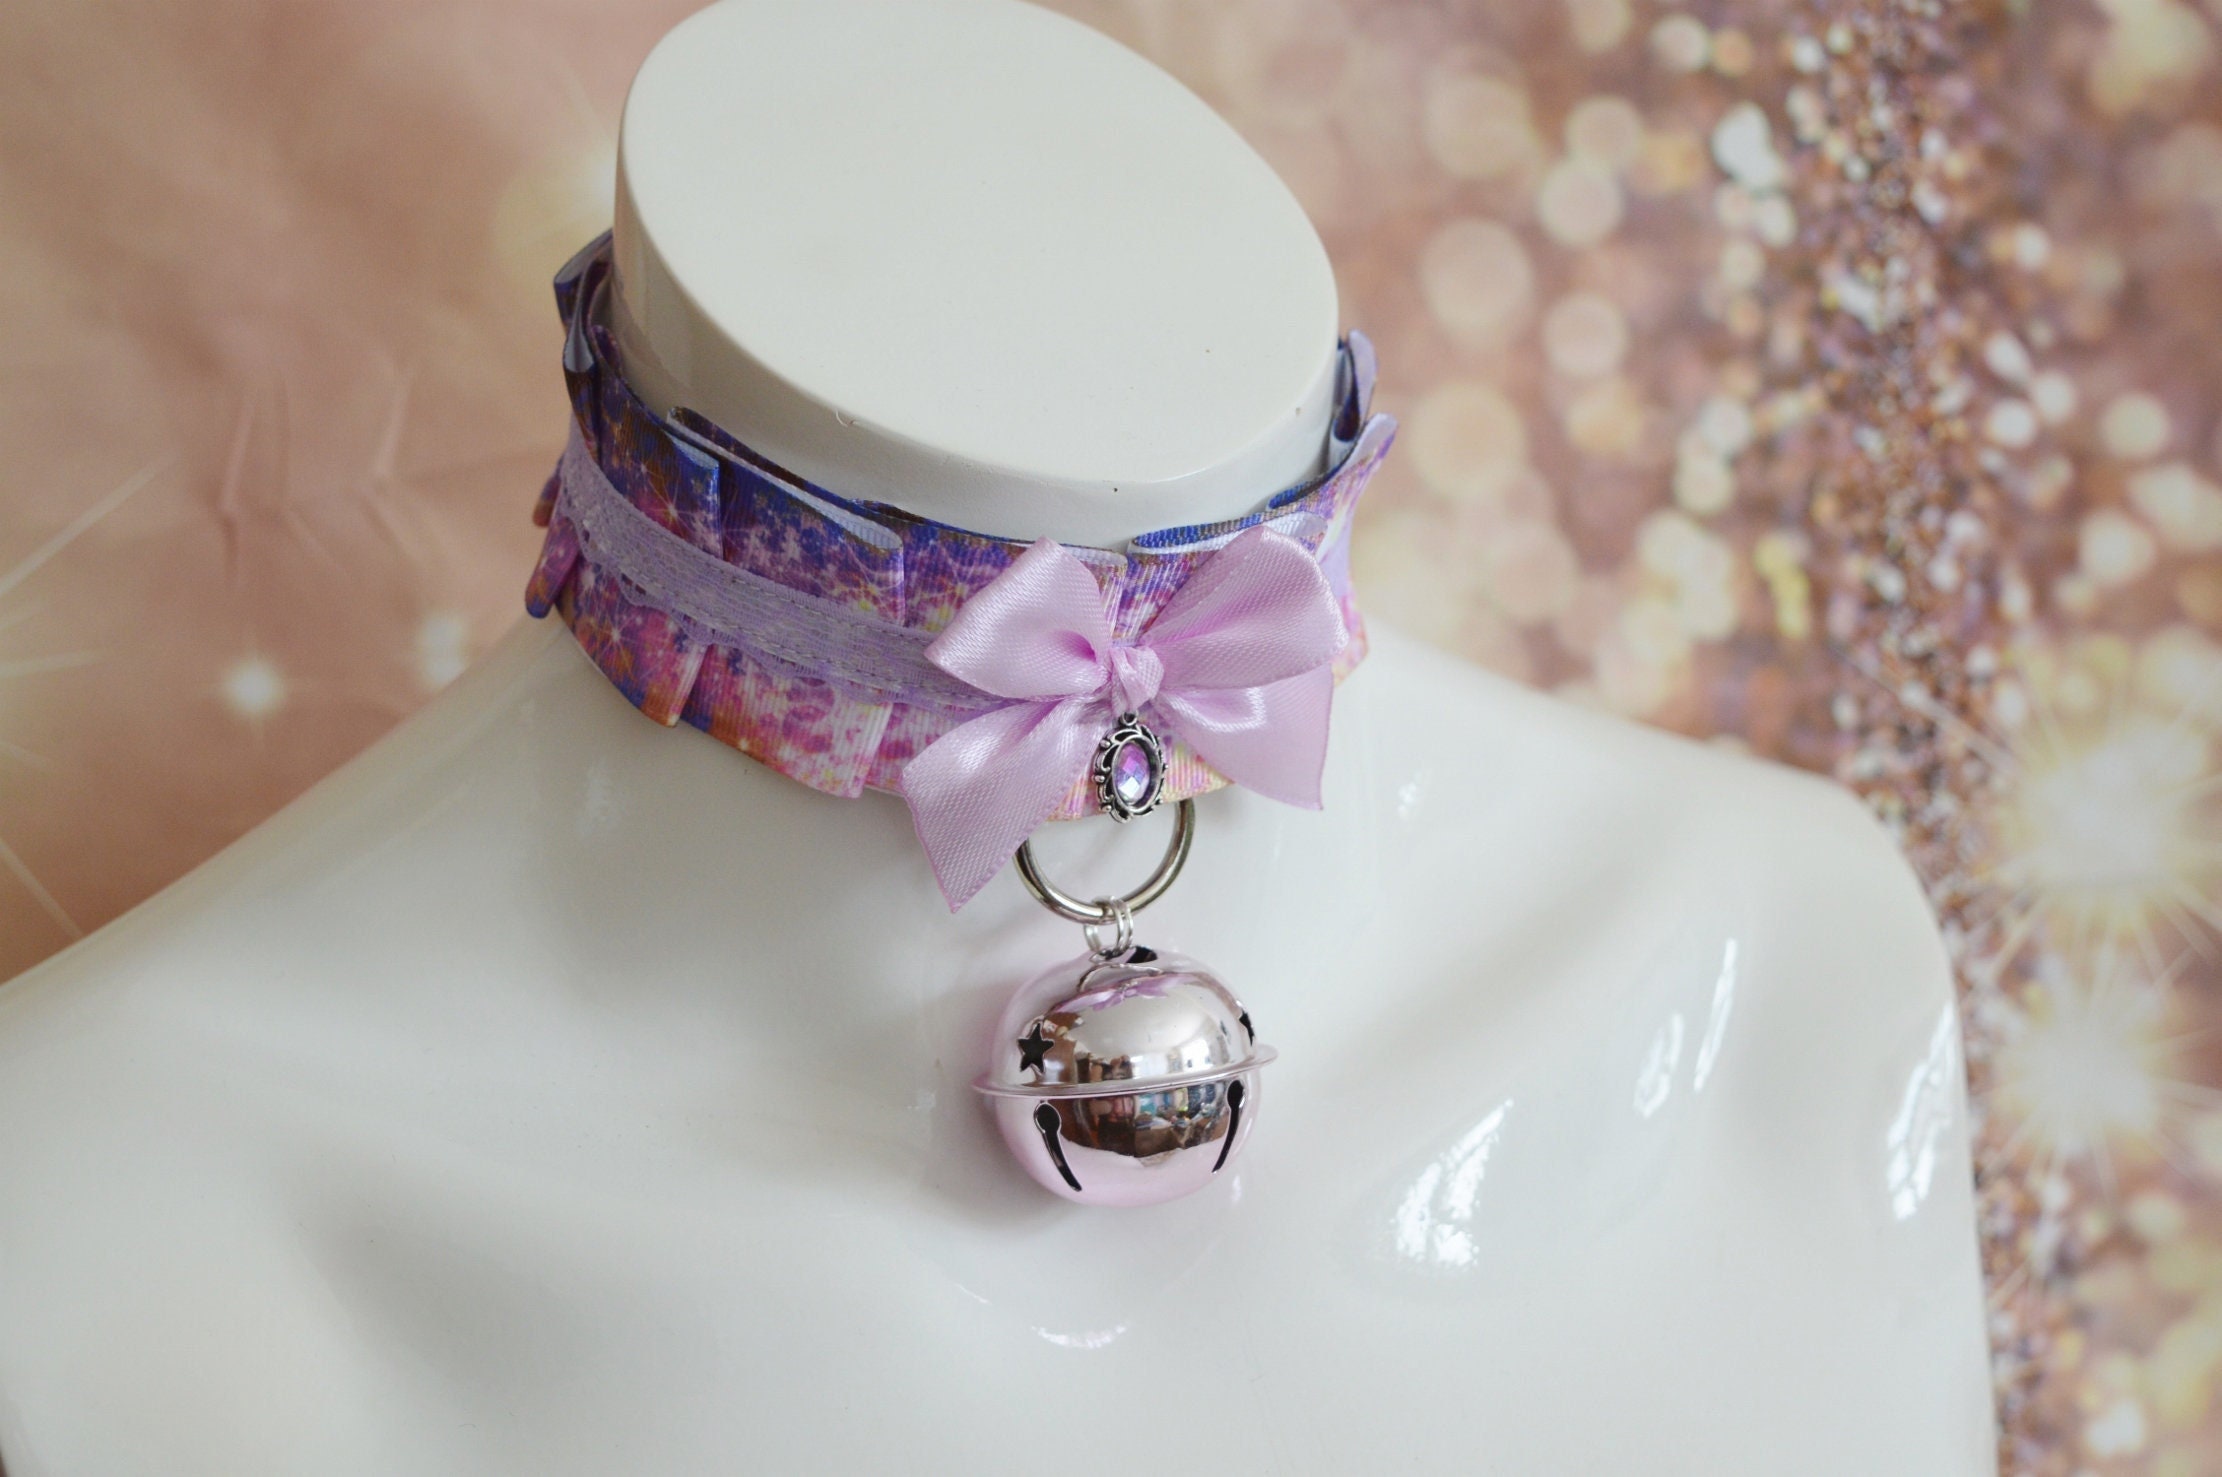 Made to Order Ddlg Collar Queen of the Universe Kittenplay Kitten